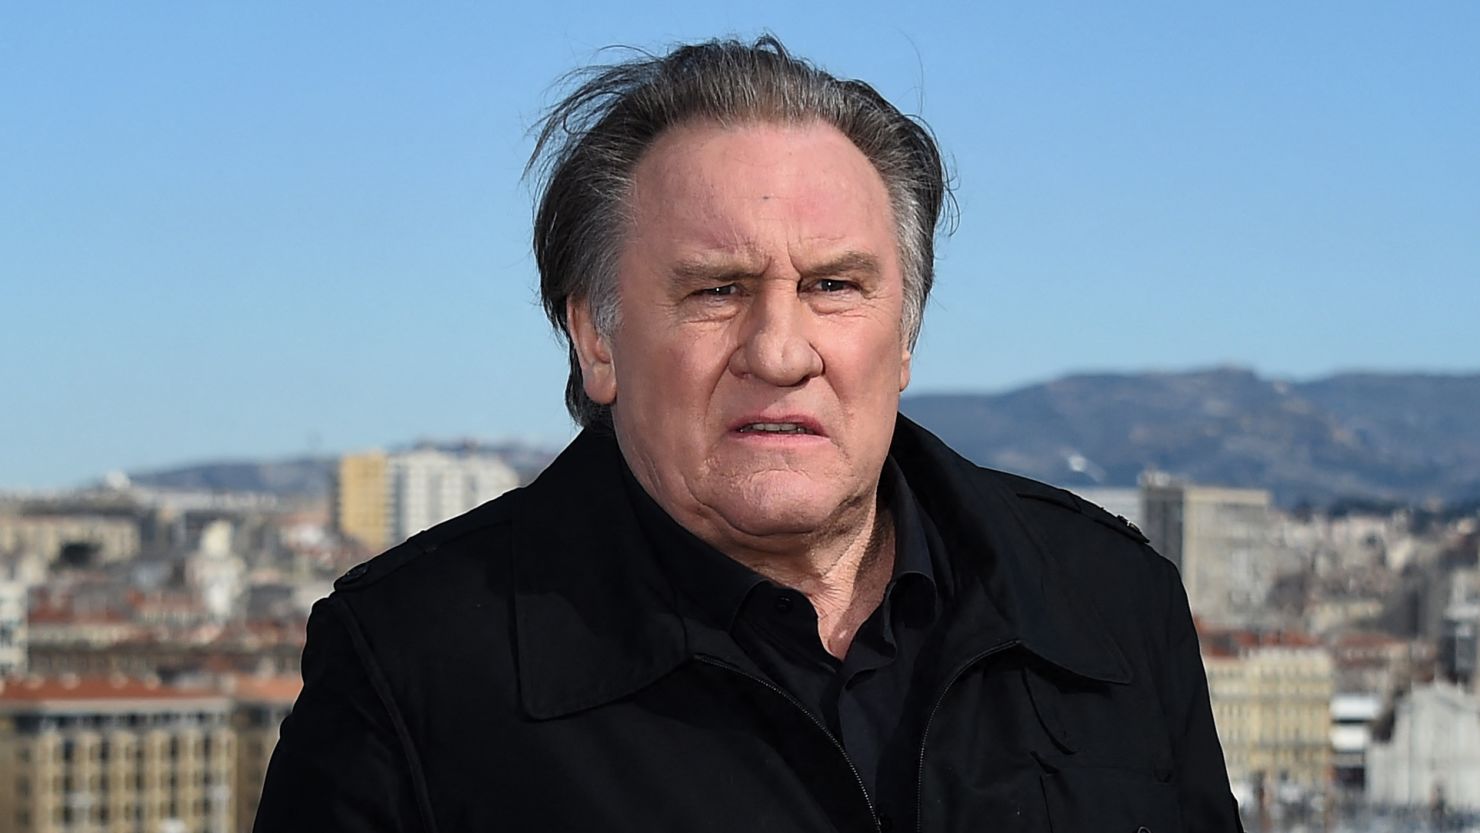 French actor Gérard Depardieu pictured in February 2018.